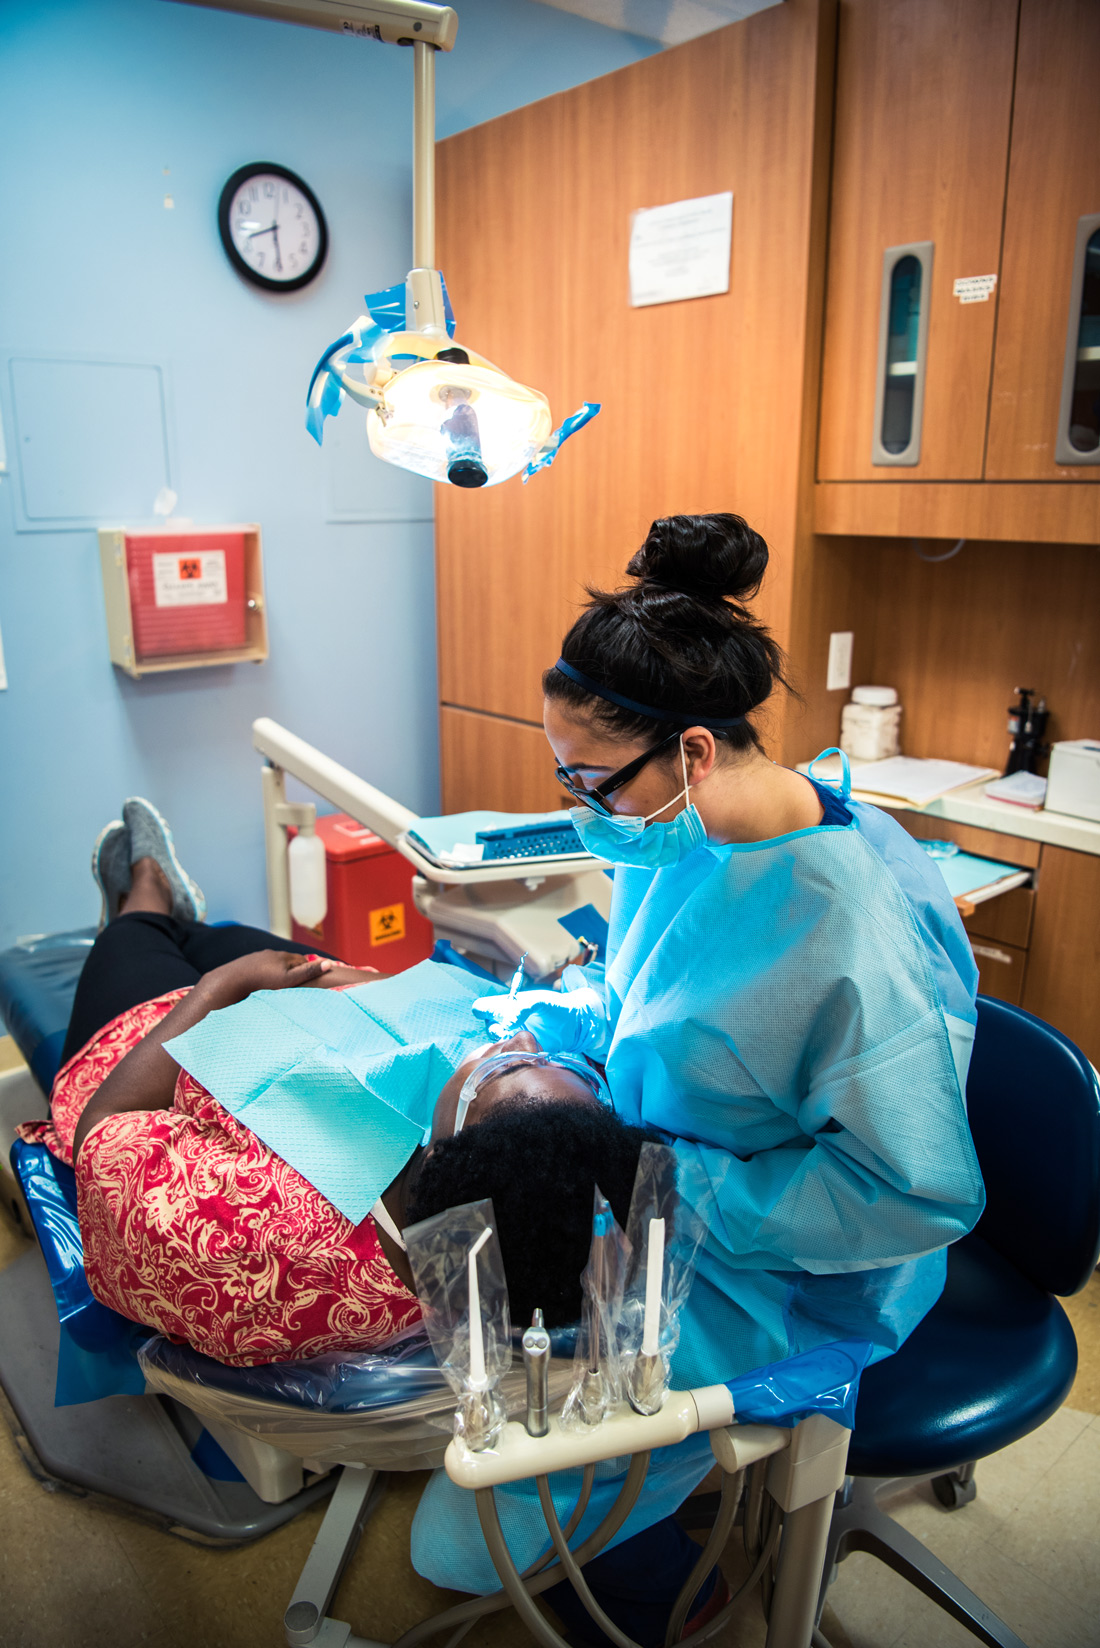 The dental clinic at the Union Rescue Mission offers treatment to Los Angeles’ homeless population living on Skid Row. | Left: Nate Jensen / Right: Hannah Benet